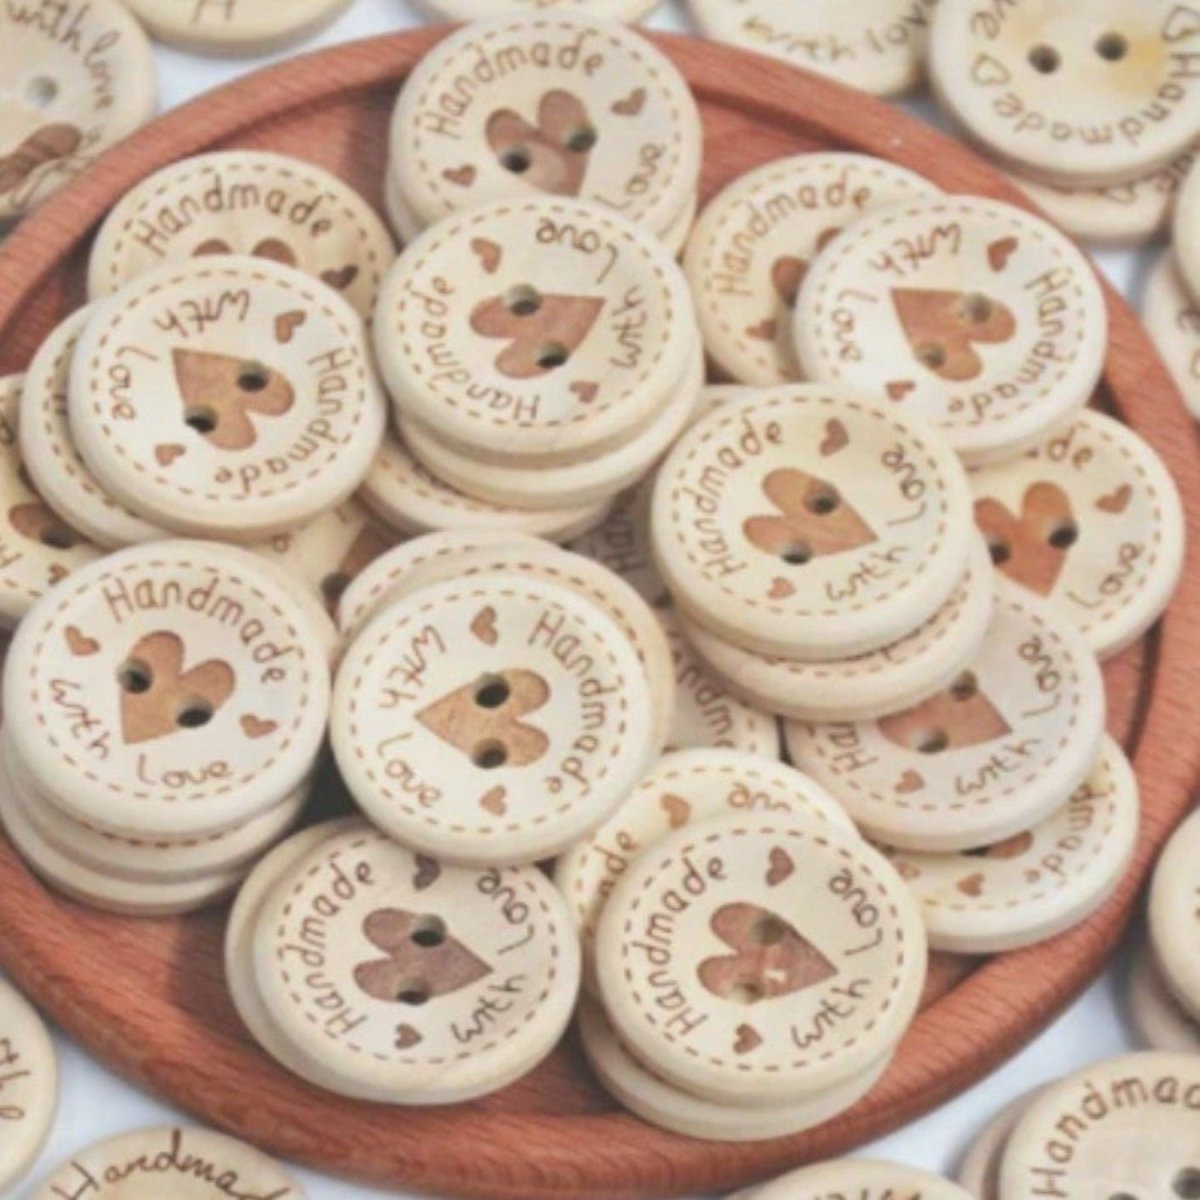 100pcs 2-Holes Handmade with Love Round Wooden Buttons Button Handmade Clothes - 15mm Heart Design - - Asia Sell